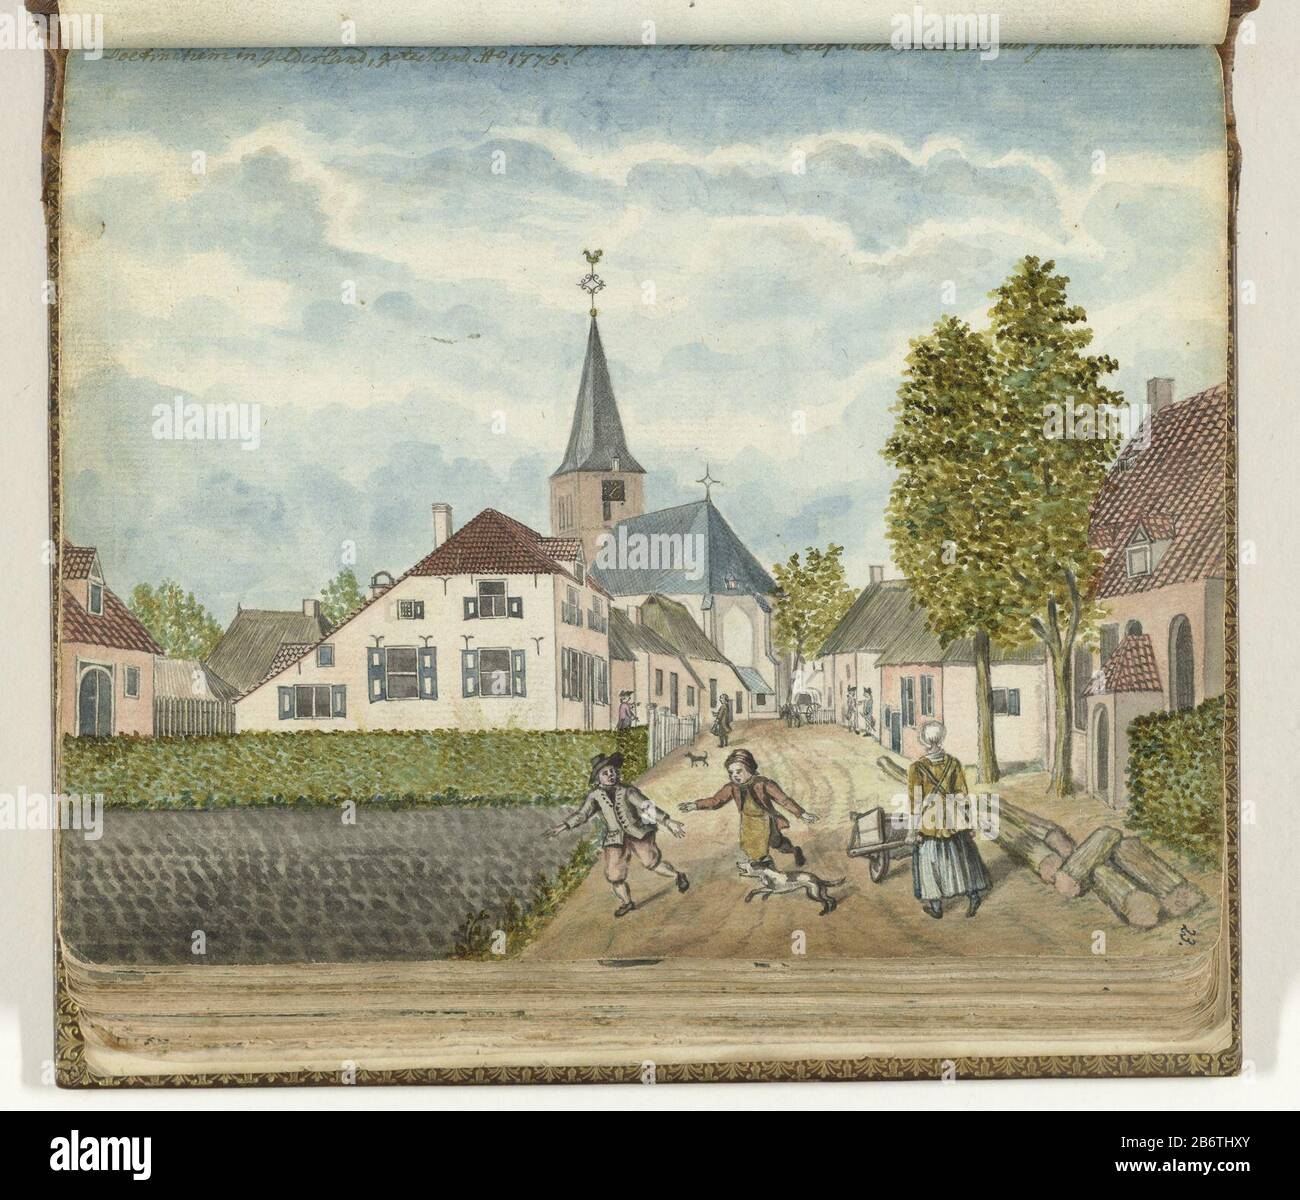 Het dorp Wehl in Cleefsland Color Drawing. Face of the village Wehl 'an hour's walk' from Doetinchem. A dirt road to the church flanked by houses. In the foreground, playing children and a woman with wheelbarrow. Behind them are two men and two soldiers. With inscription. Part of the sketchbook of Jan Brandes, Vol. 1 (1808), p. 23. Manufacturer : artist: Jan BrandesPlaats manufacture: Wehl Date: 1775 Physical features: watercolor on sketch in pencil, paintbrush color material: Paper Pencil Technique: Brush dimensions: H 155 mm × W 195 mm Date: 1775 - 1775 Stock Photo